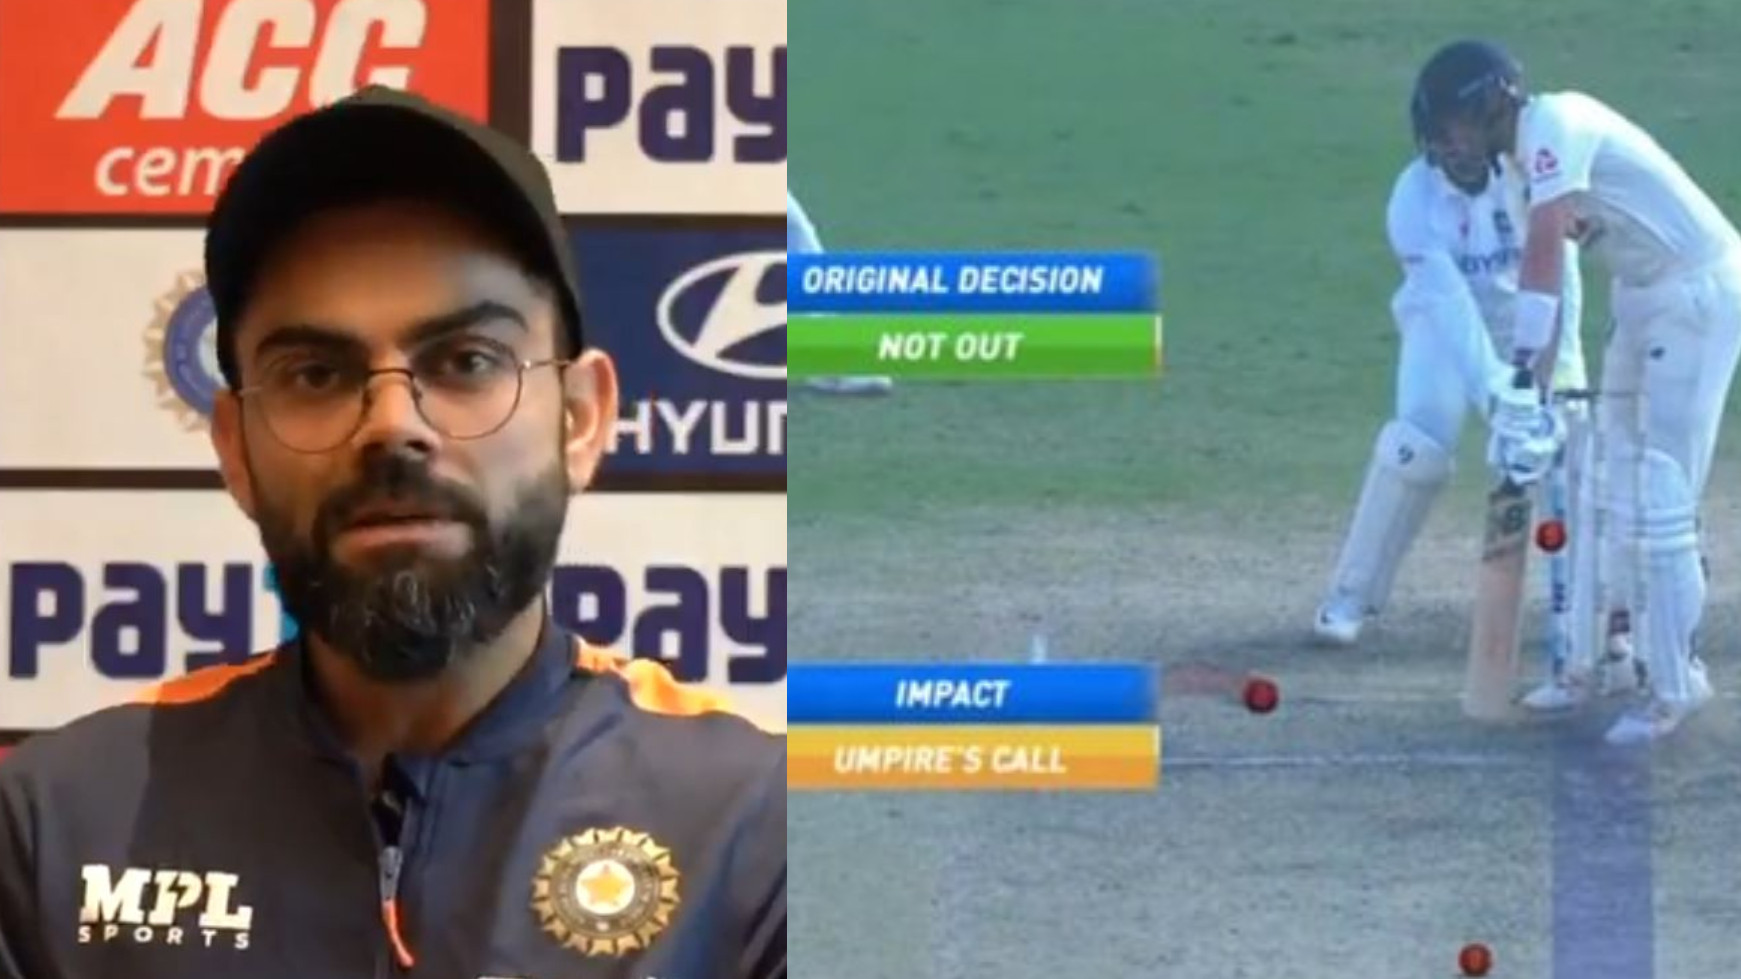 IND v ENG 2021: The grey areas of umpire’s call should be addressed, opines Virat Kohli